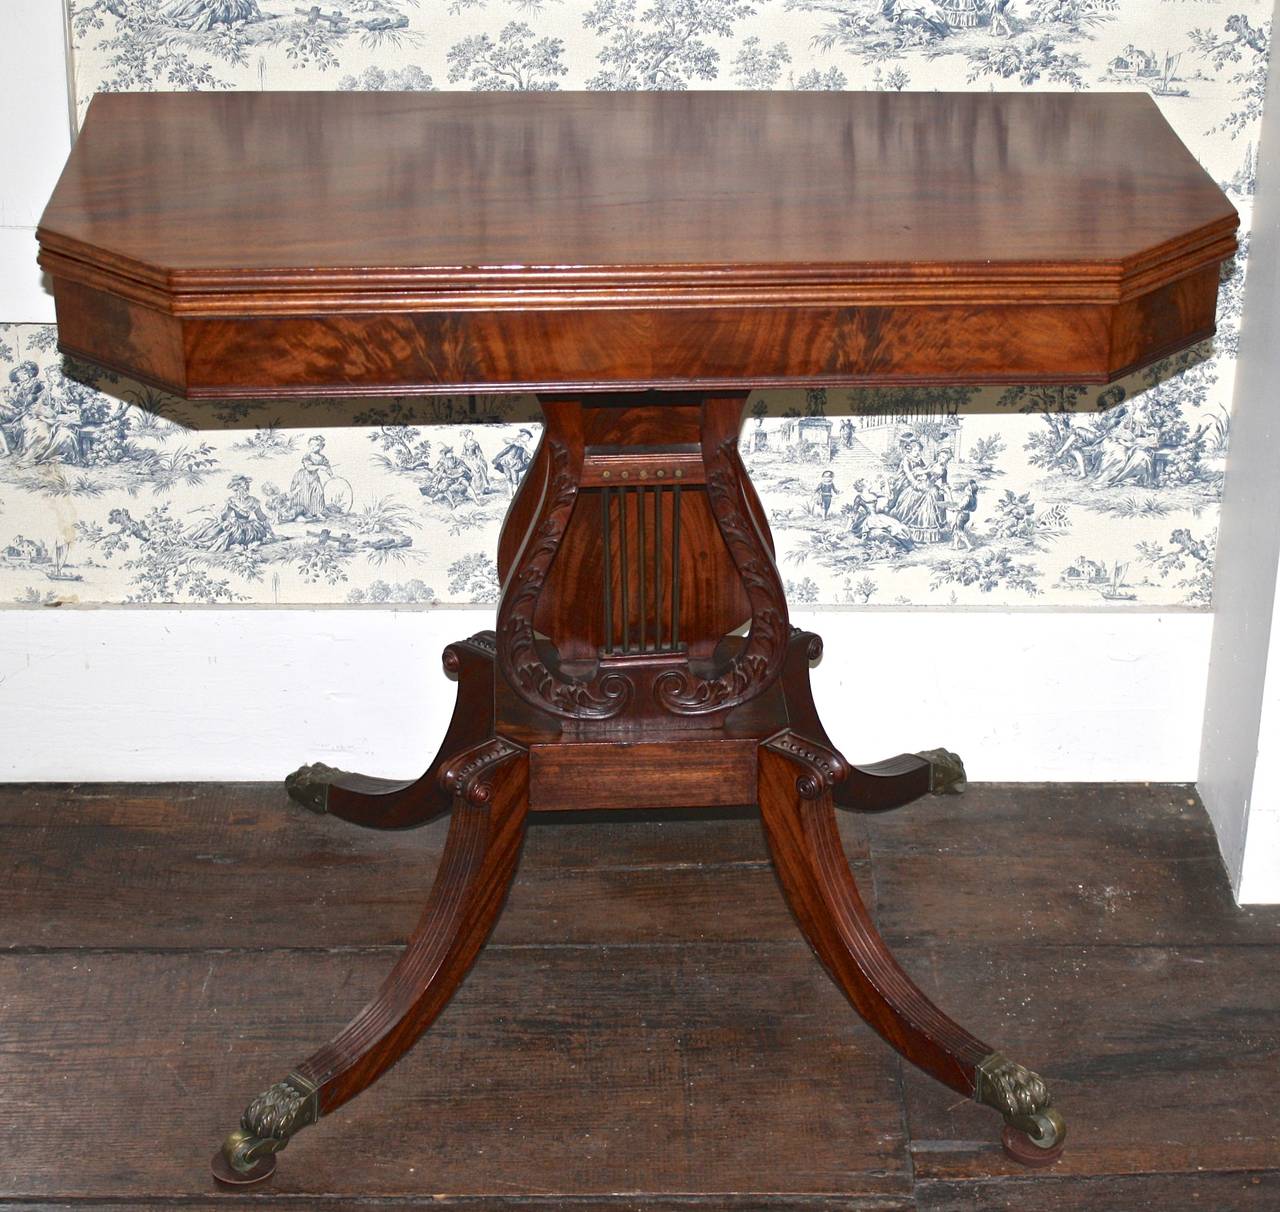 A boldly figured golden mahogany fold-over games table, on a foliate carved and brass strung lyre-form base. Reeded legs with trimmed knees and original brass pawed casters. The fold-over top has a moulded edge and diagonal hypotenuse-cut corners;